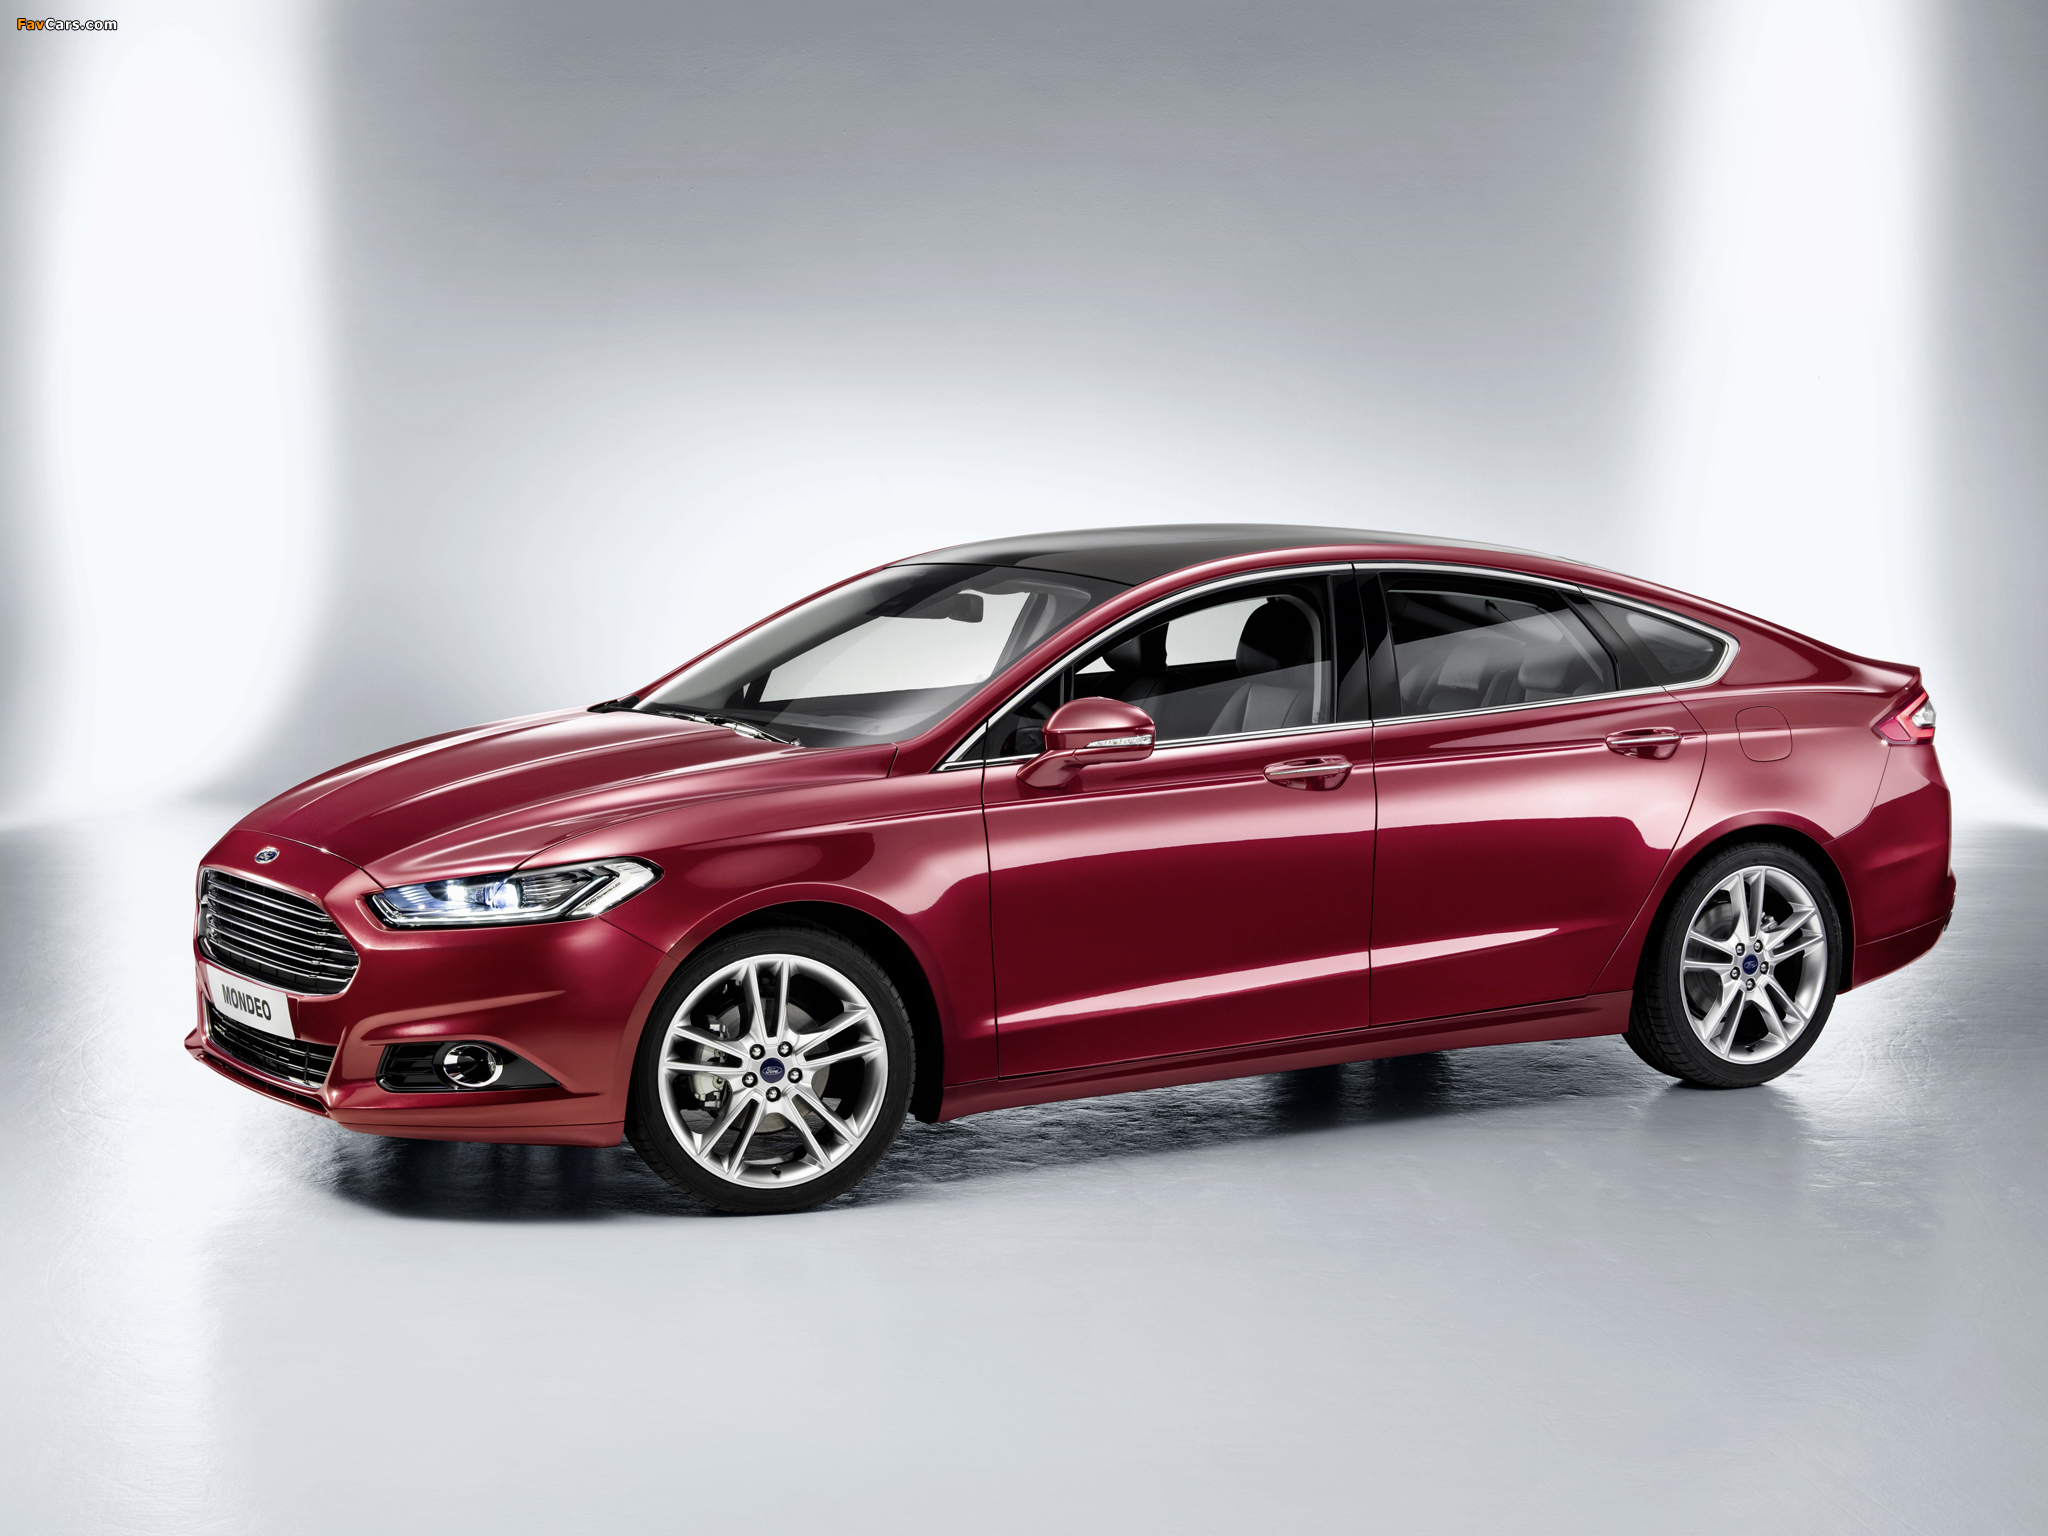 This is the 2013 Ford Mondeo | Top Gear